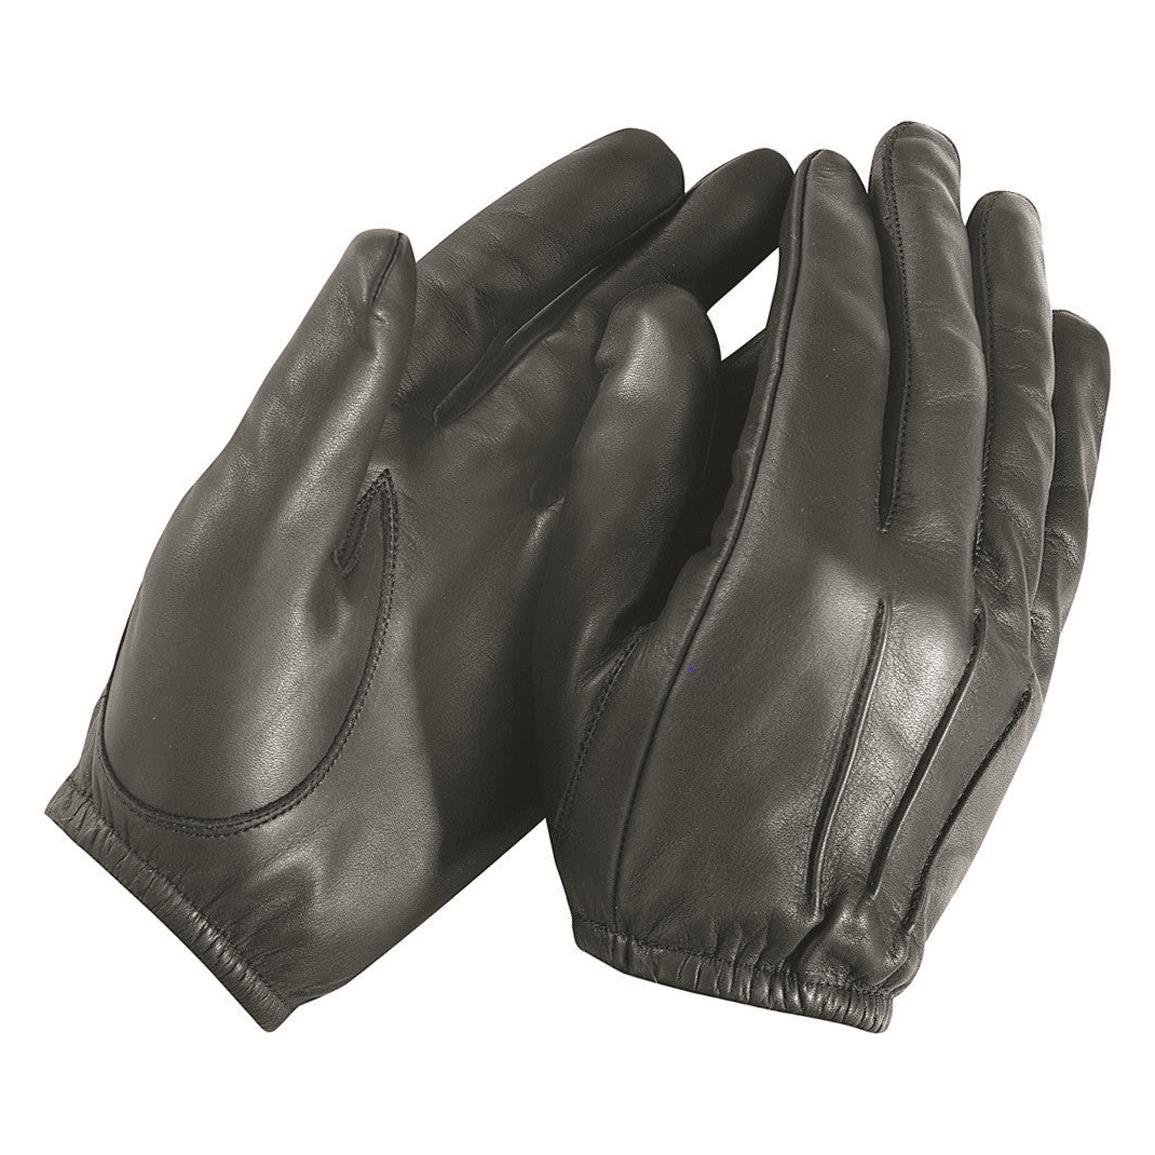 U.S. Police Surplus Leather Search Gloves, New, Black